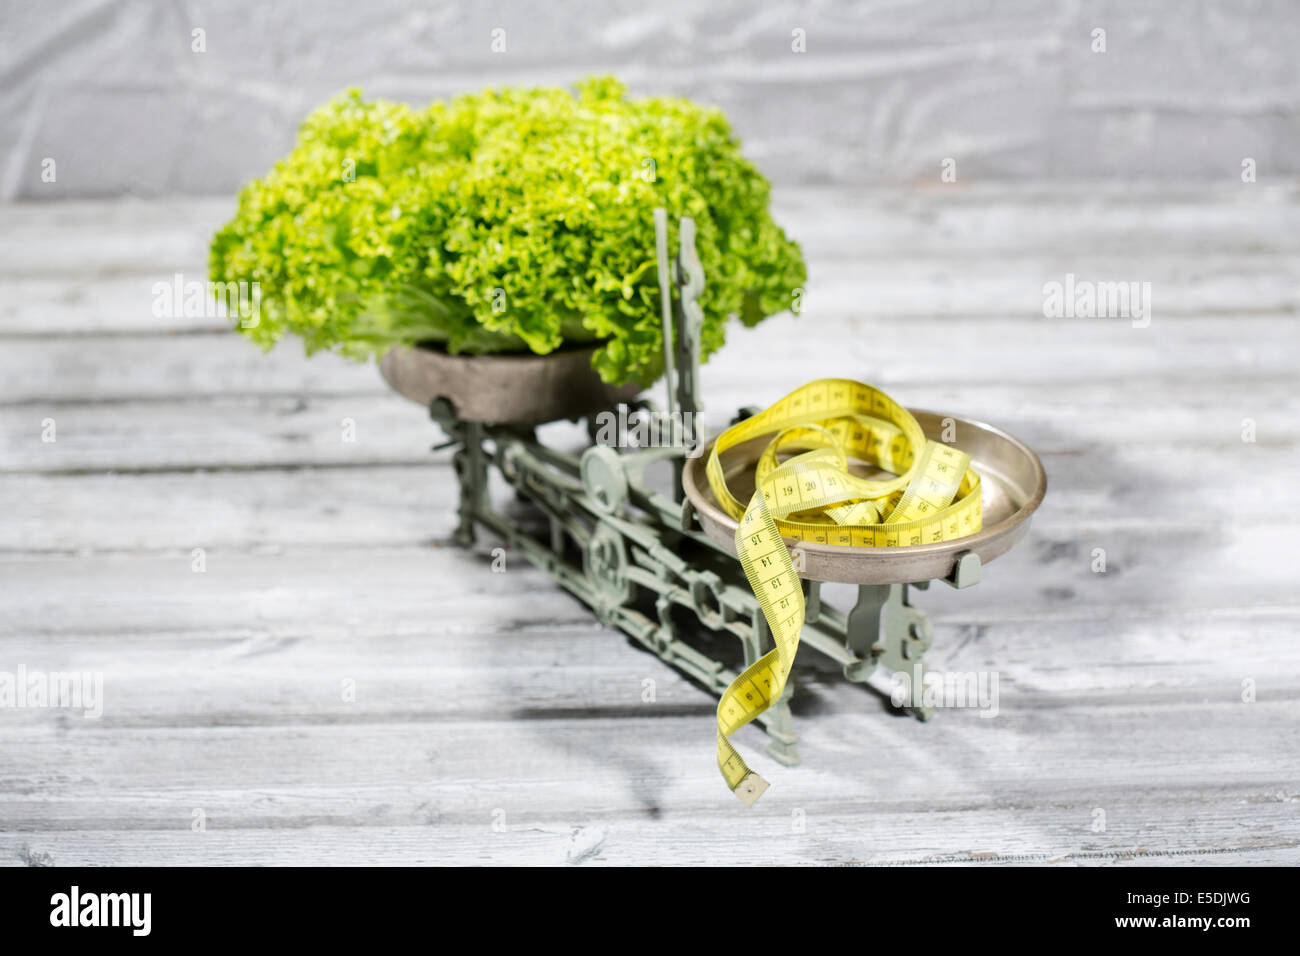 Lettuce and tape measure on scale Stock Photo